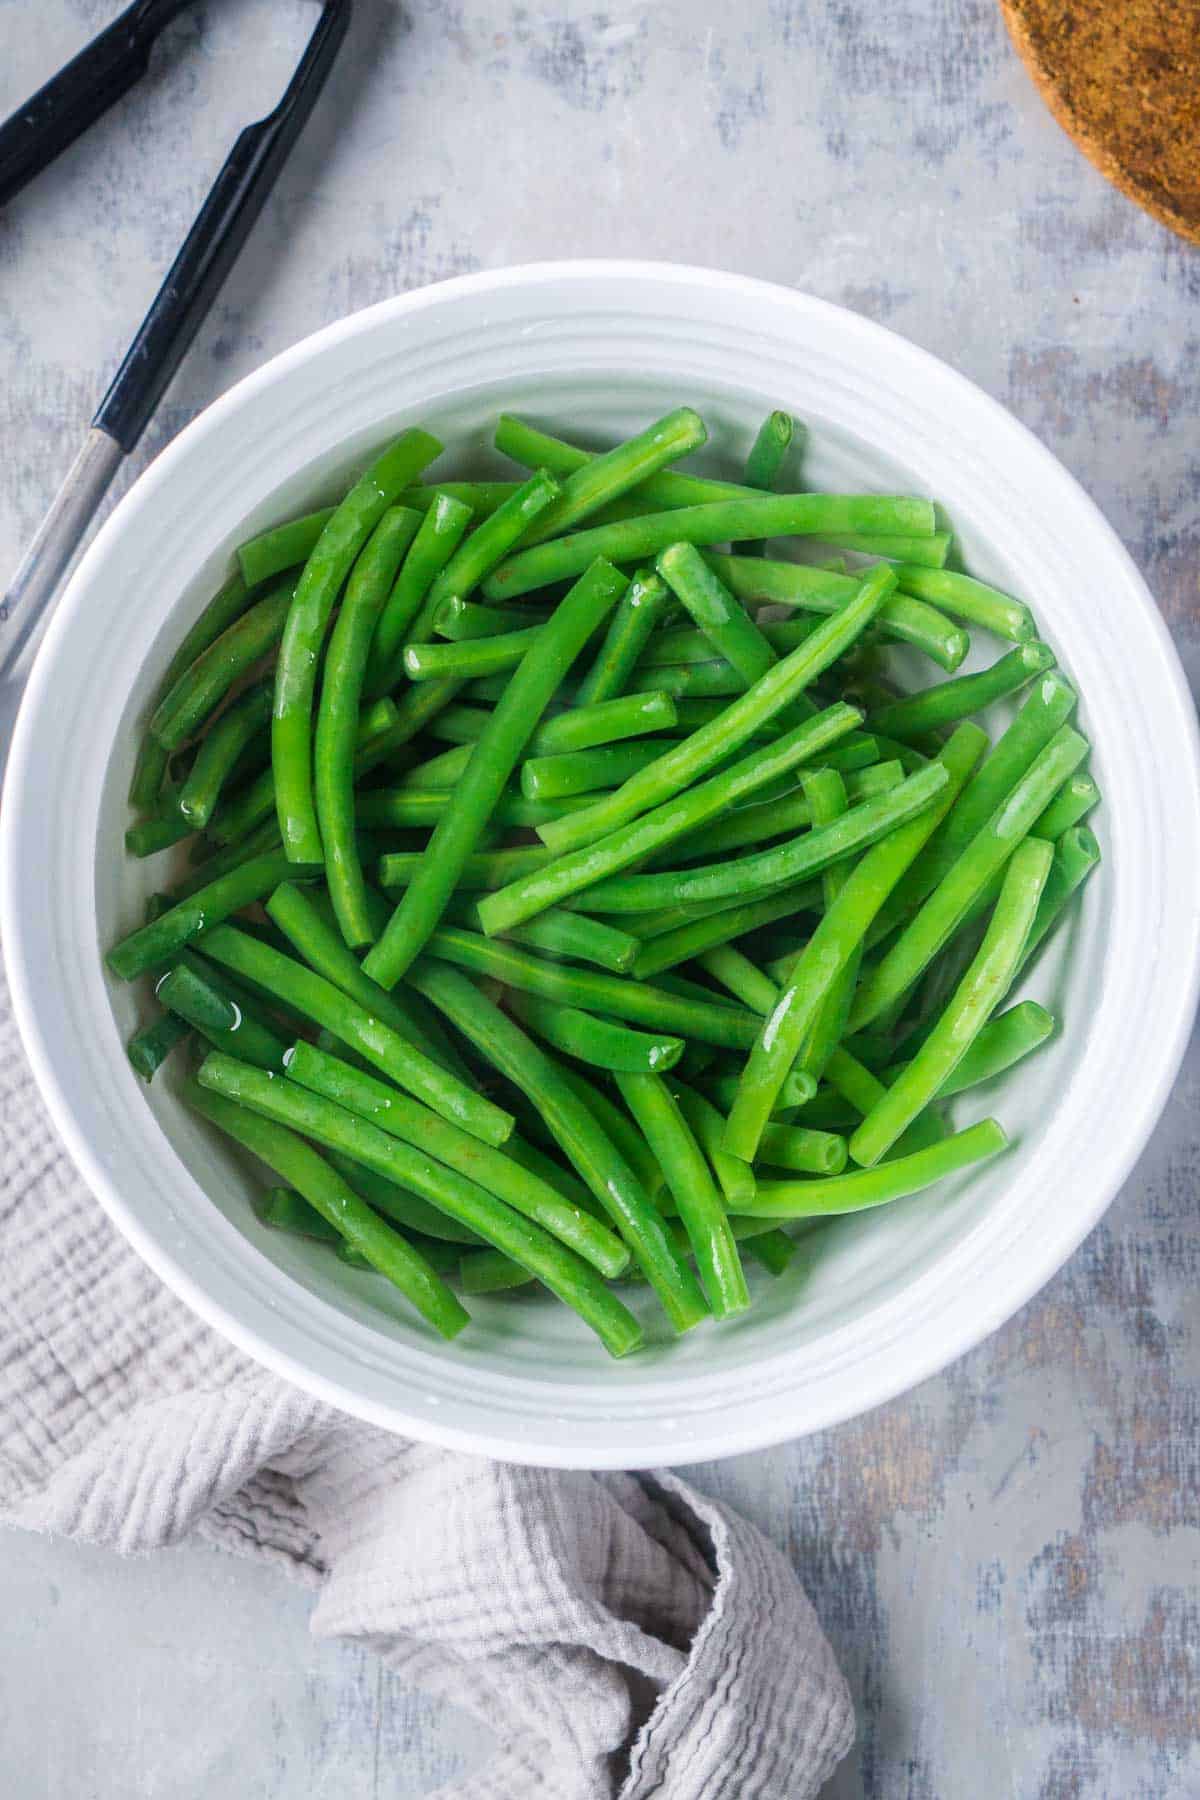 cooked green beans soak in cold water bath